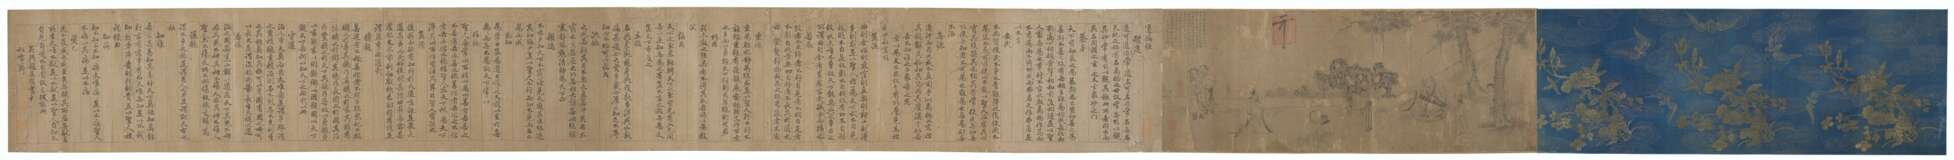 WITH SIGNATURES OF LI GONGLIN (1049-1106) AND ZHAO MENGFU (1254-1322) - фото 1